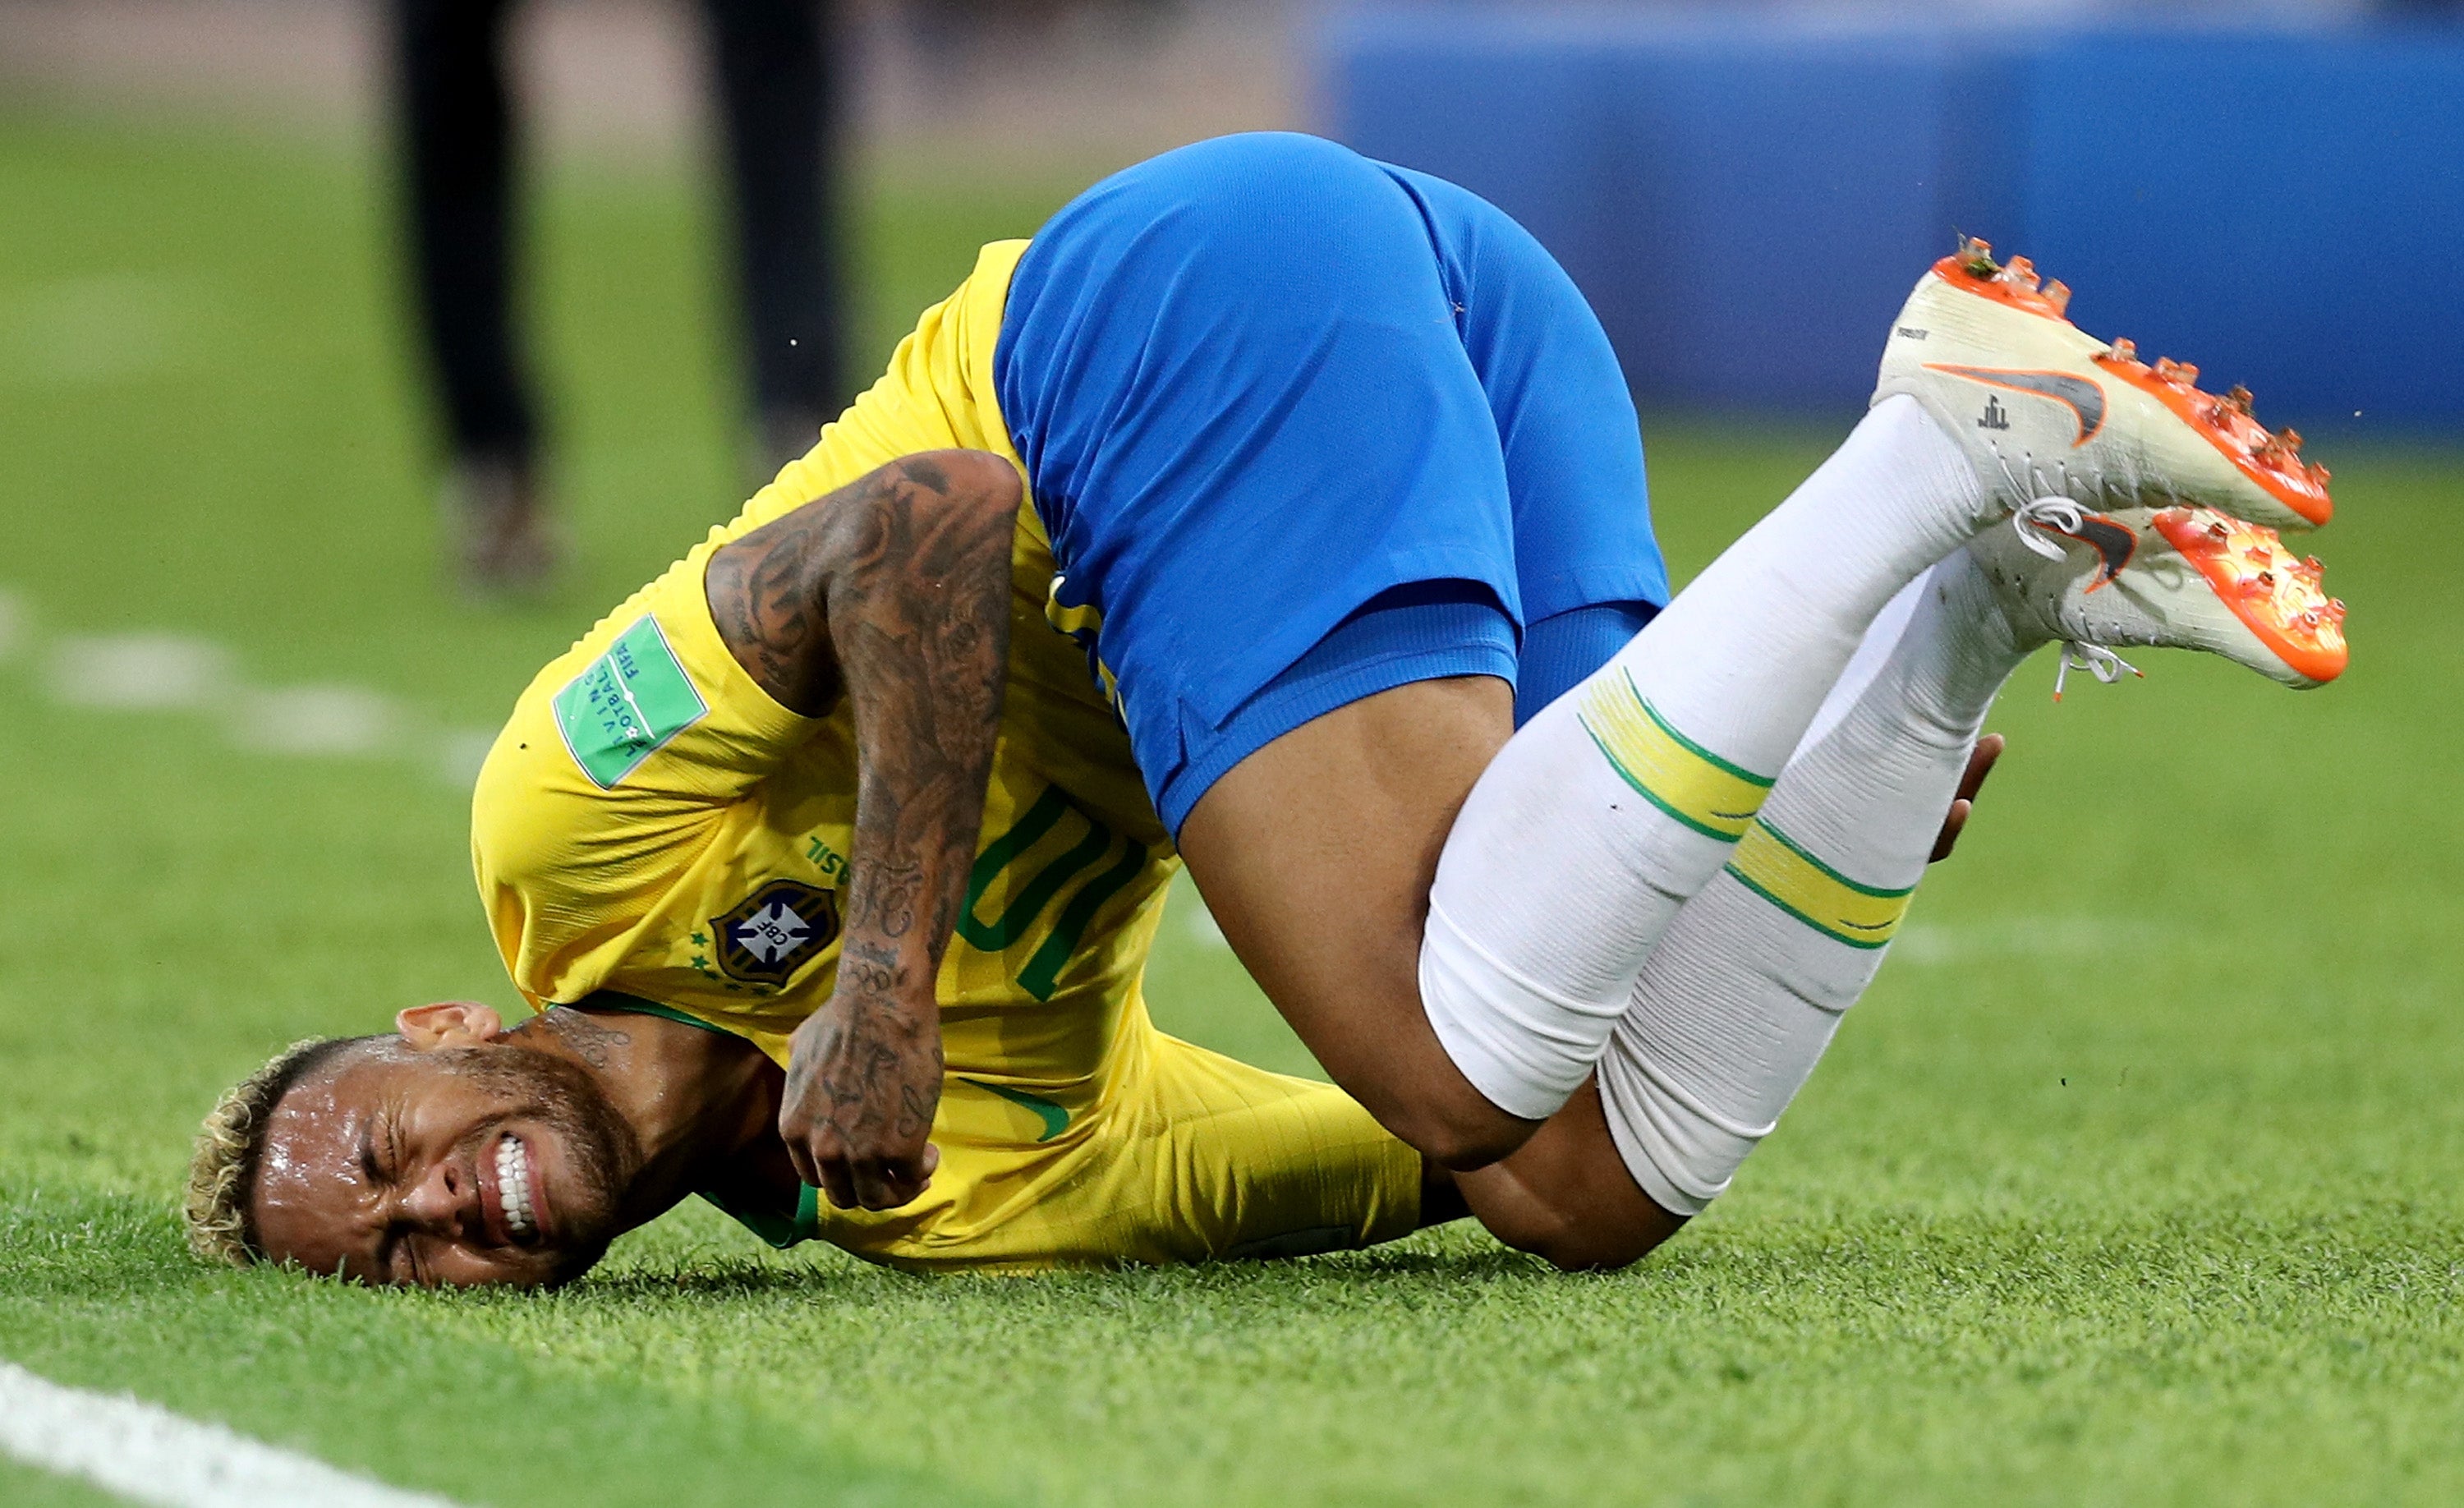 Neymar’s World Cup journey is one of disappointment so far